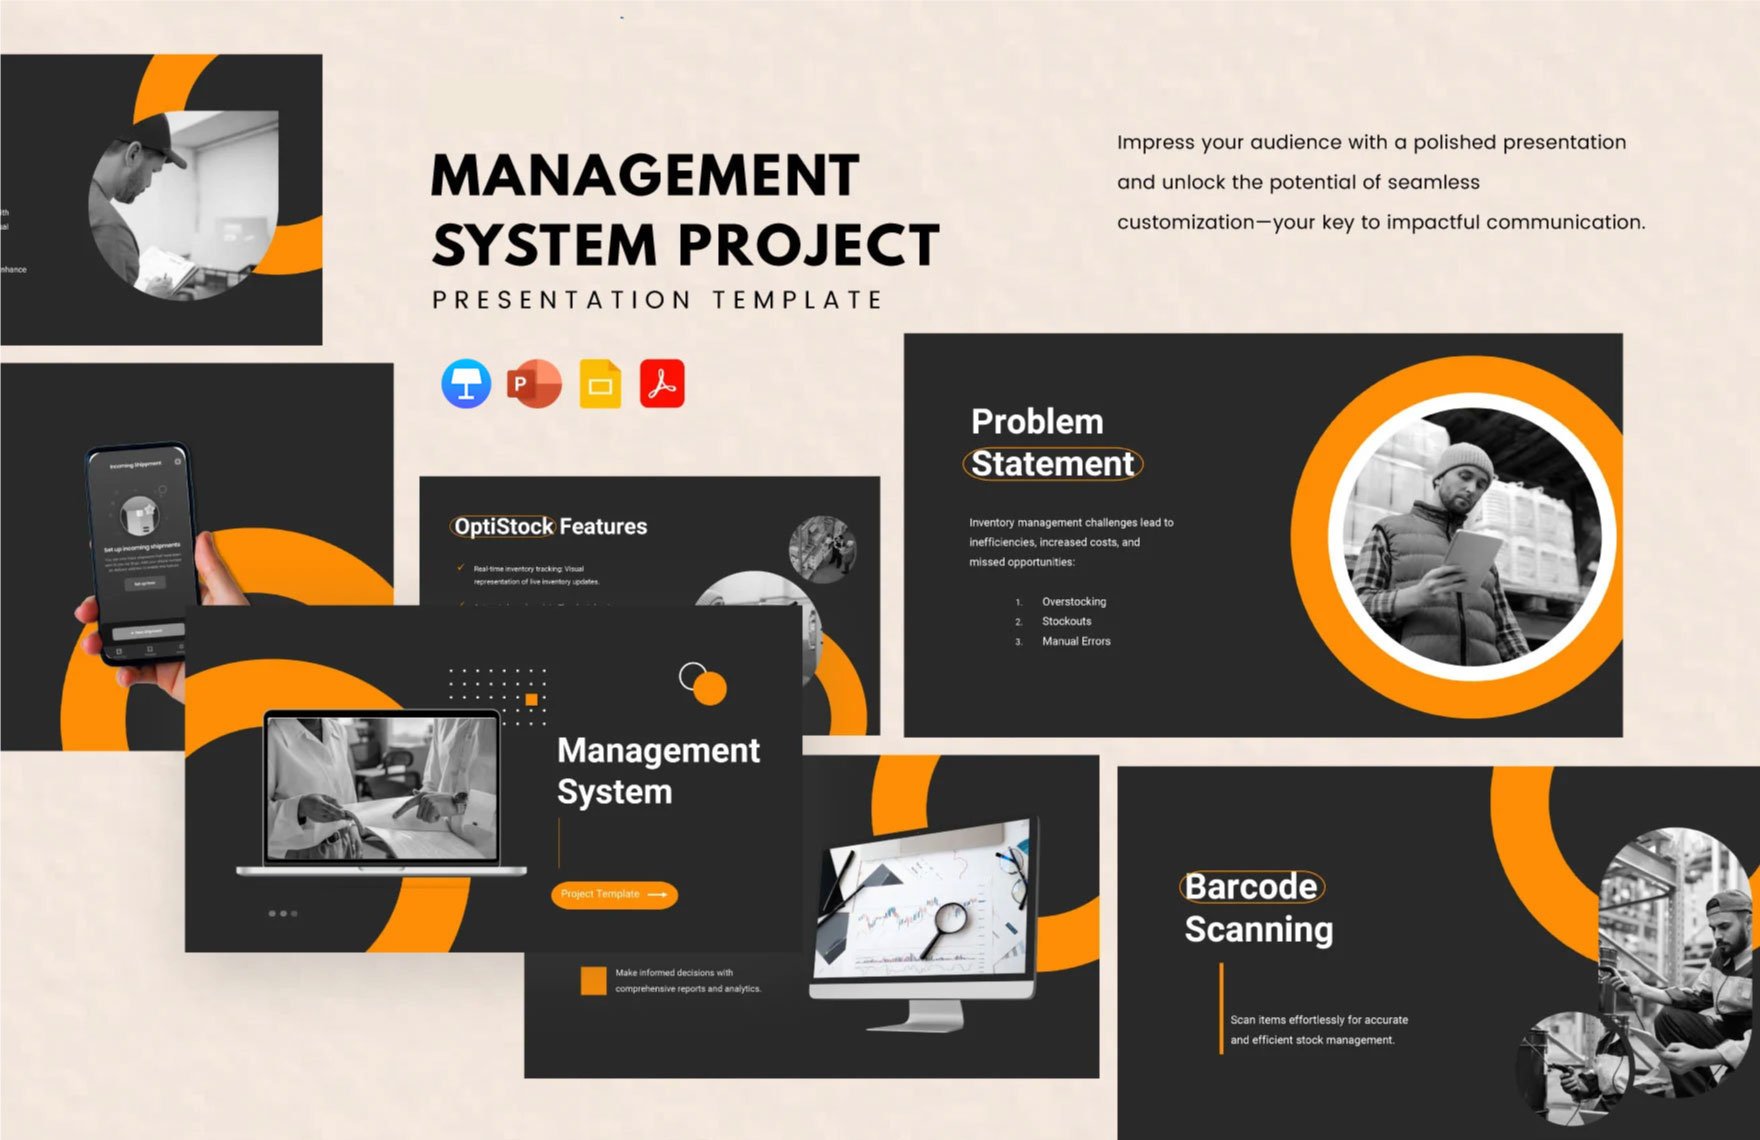 Management System Project Template